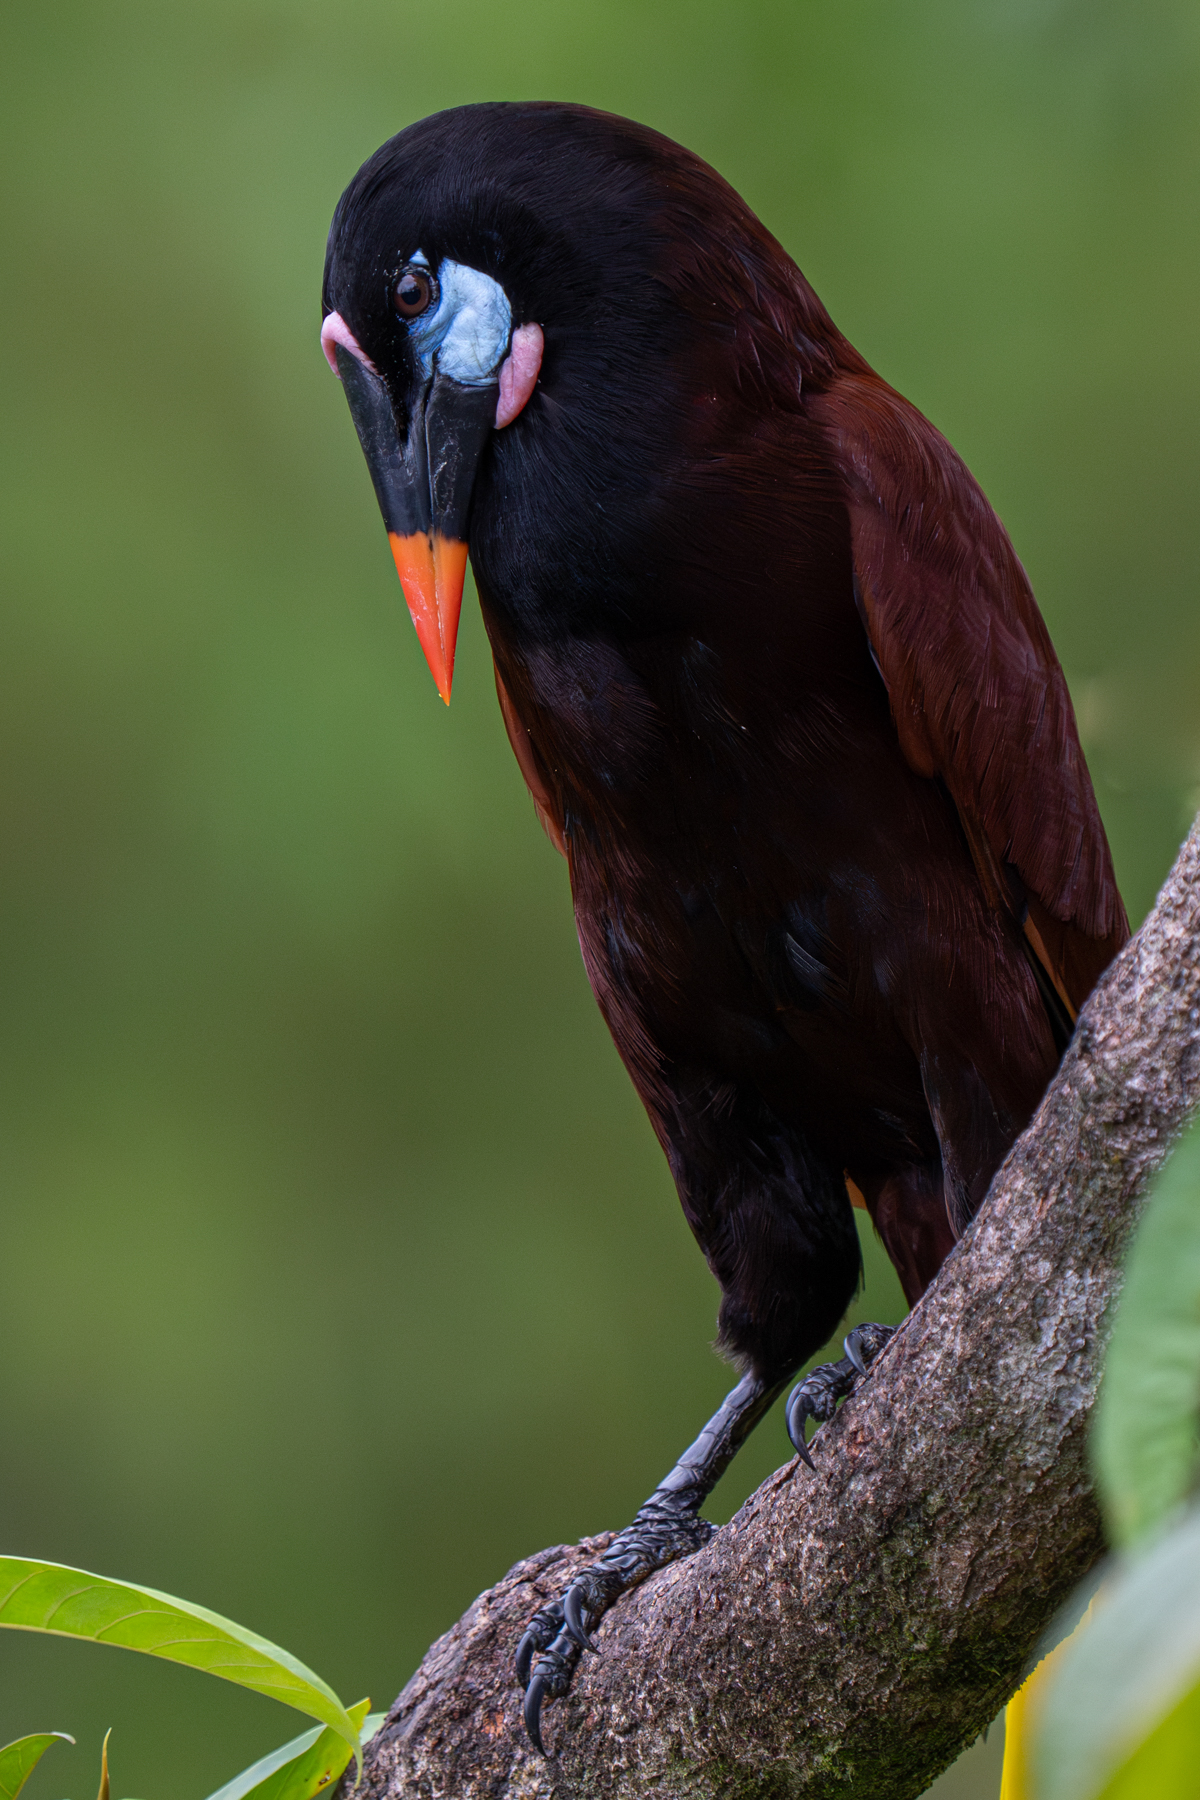 Before a Montezuma Oropendola sings its melodious song, it cranes its head and rattles. They really are fantastic birds! (image by Inger Vandyke)